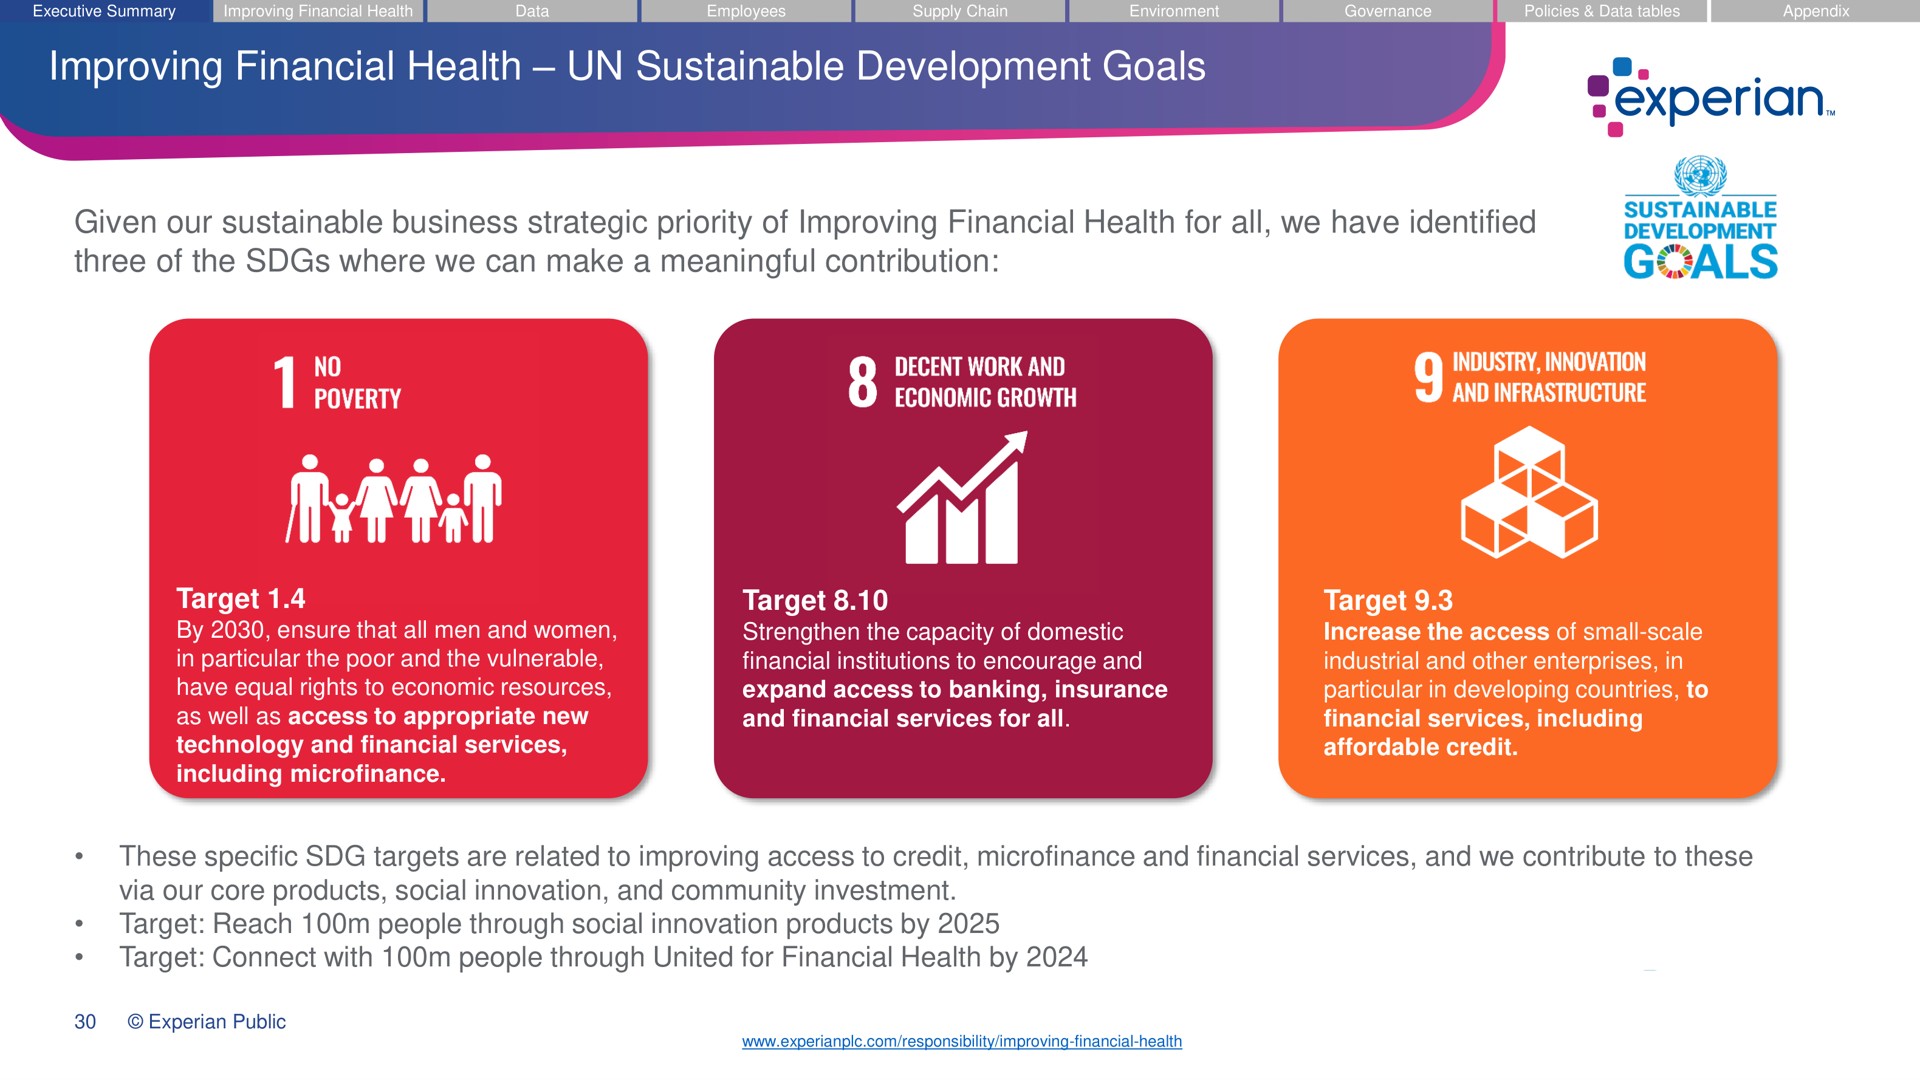 improving financial health sustainable development goals given our sustainable business strategic priority of improving financial health for all we have identified three of the where we can make a meaningful contribution | Experian